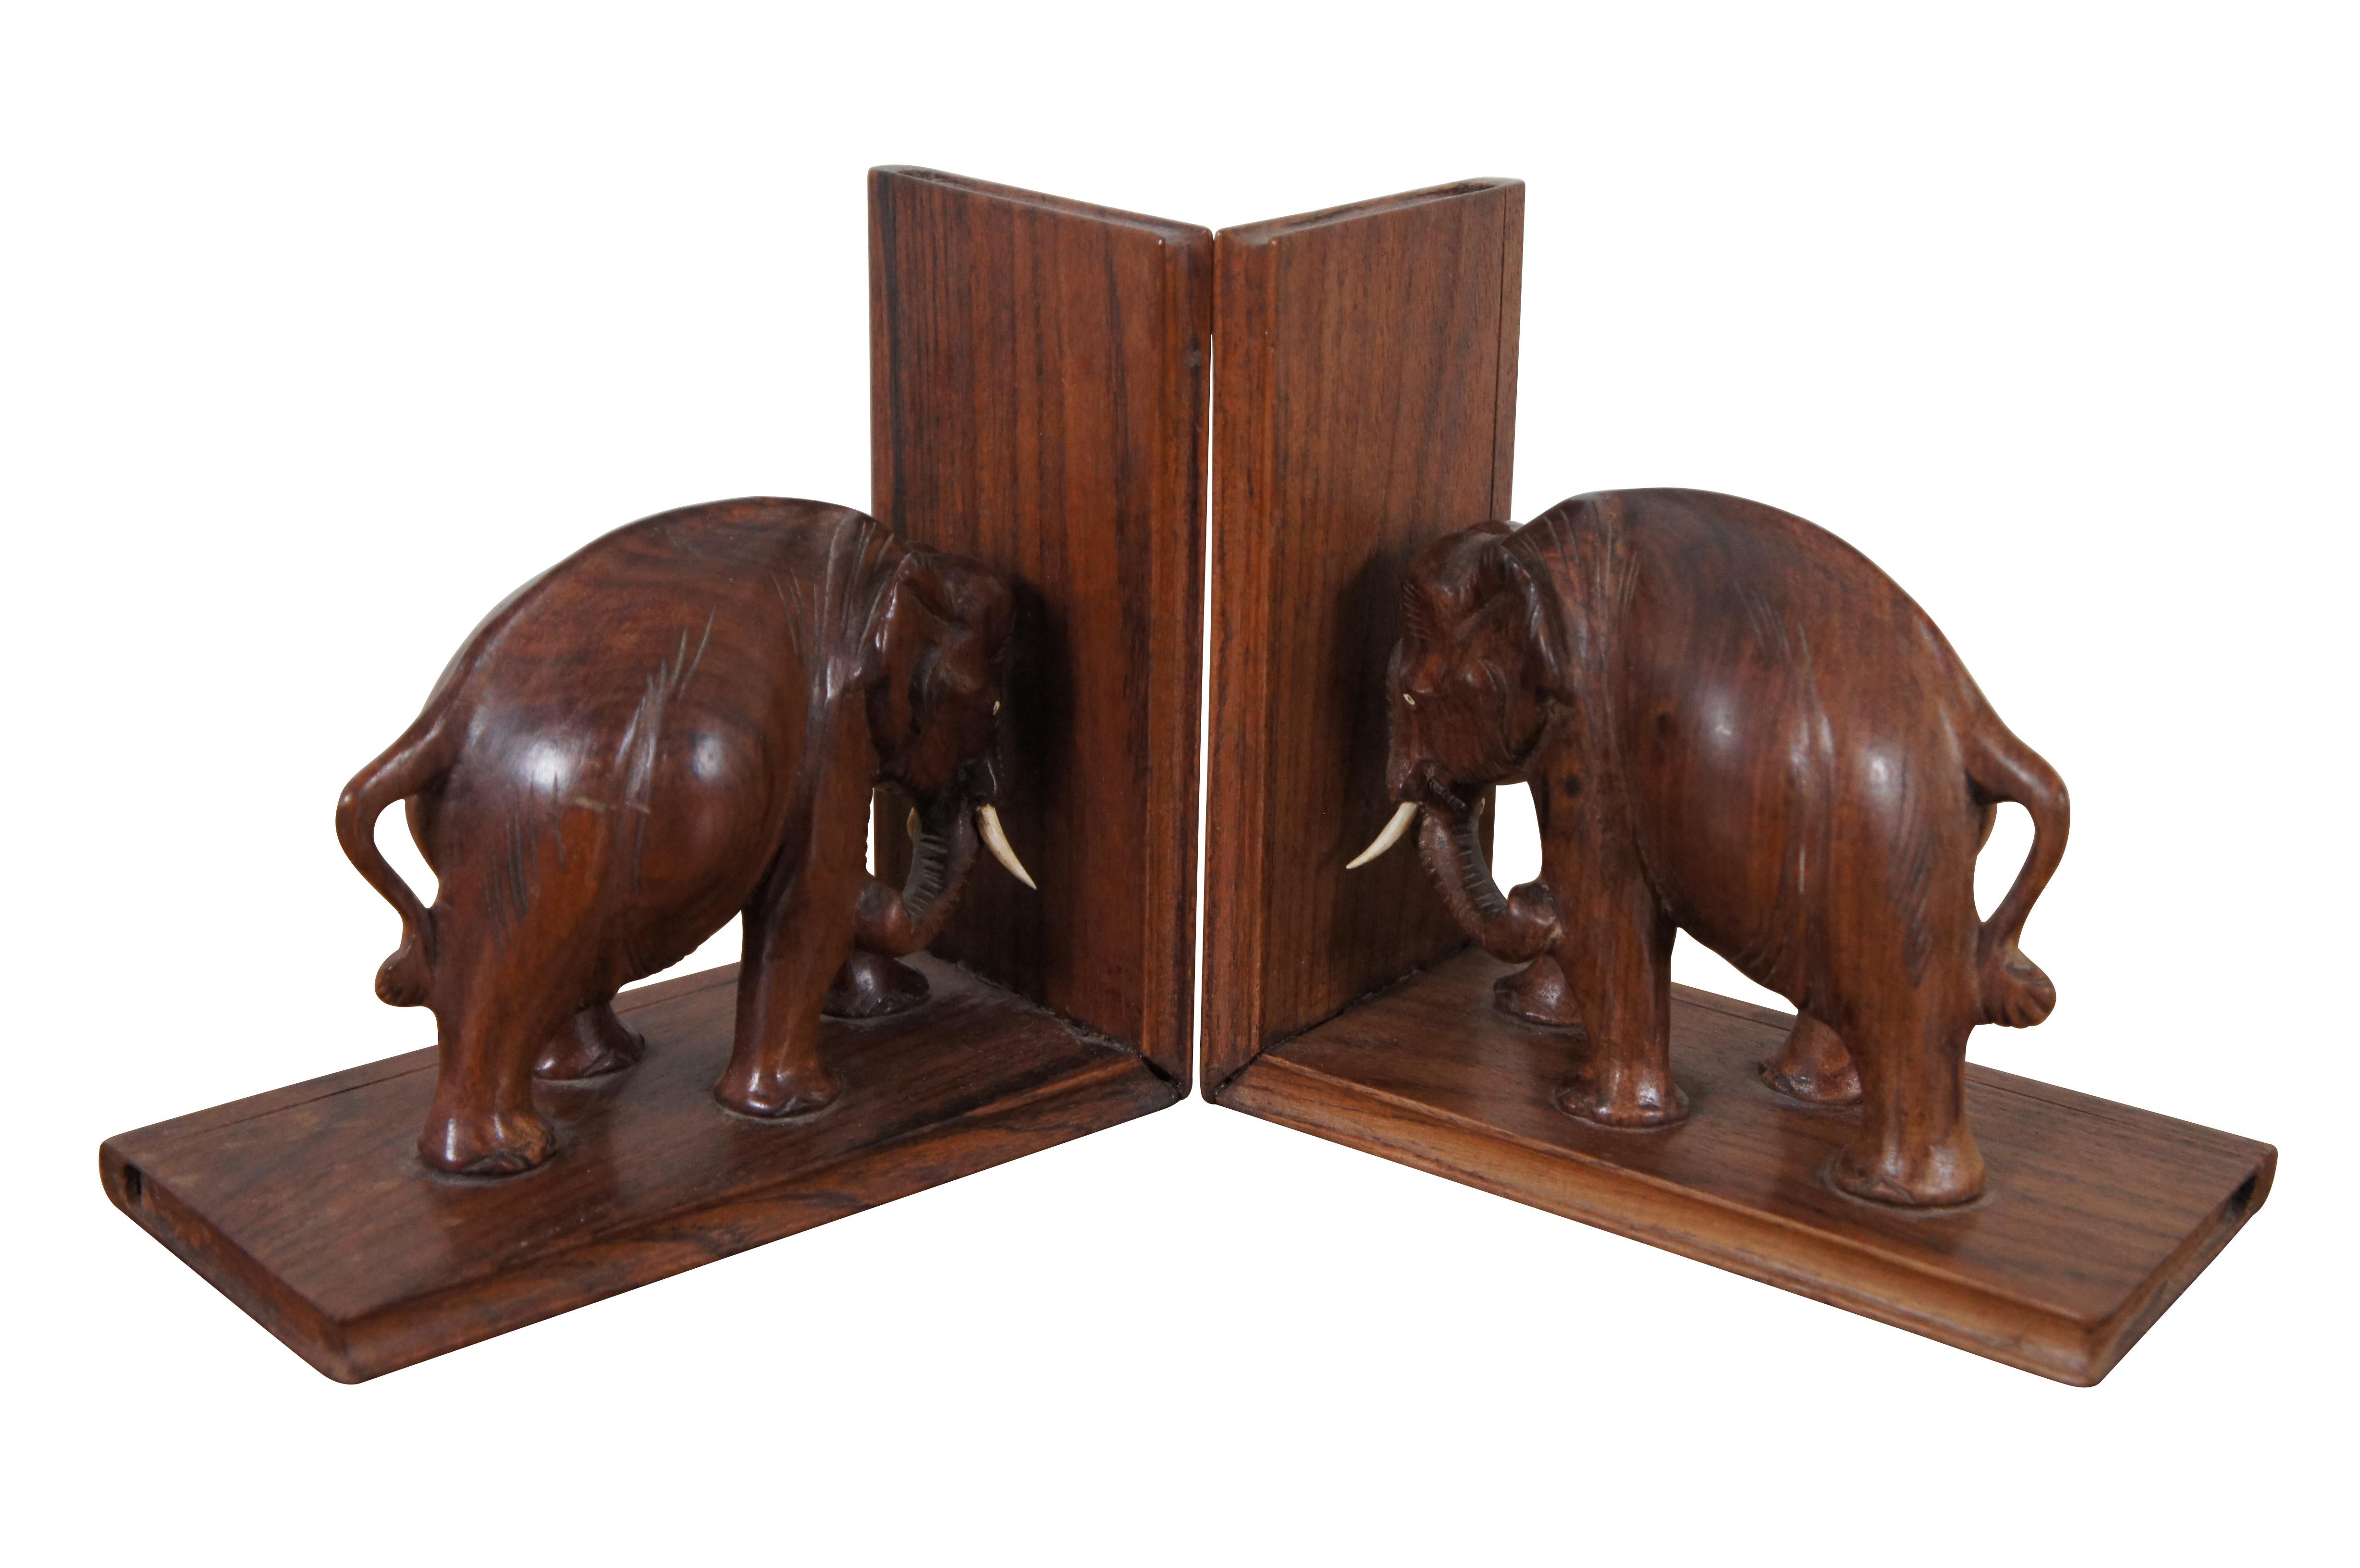 Pair of mid 20th century hand carved Rosewood bookends featuring African elephants with inlaid eyes and tusks, standing on book shaped panels.

Dimensions:
6.5